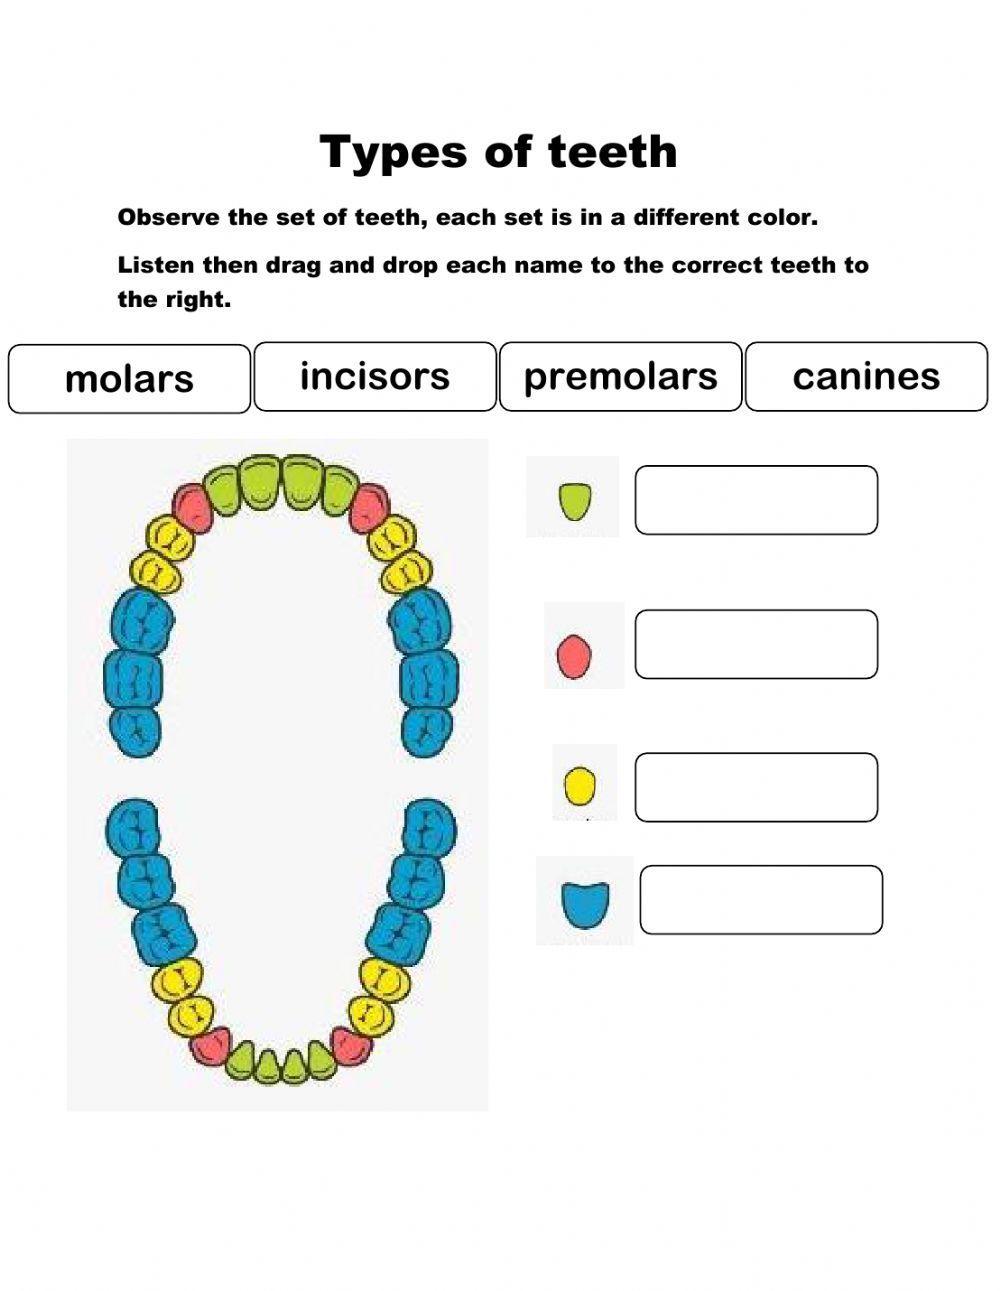 The Types of Teeth